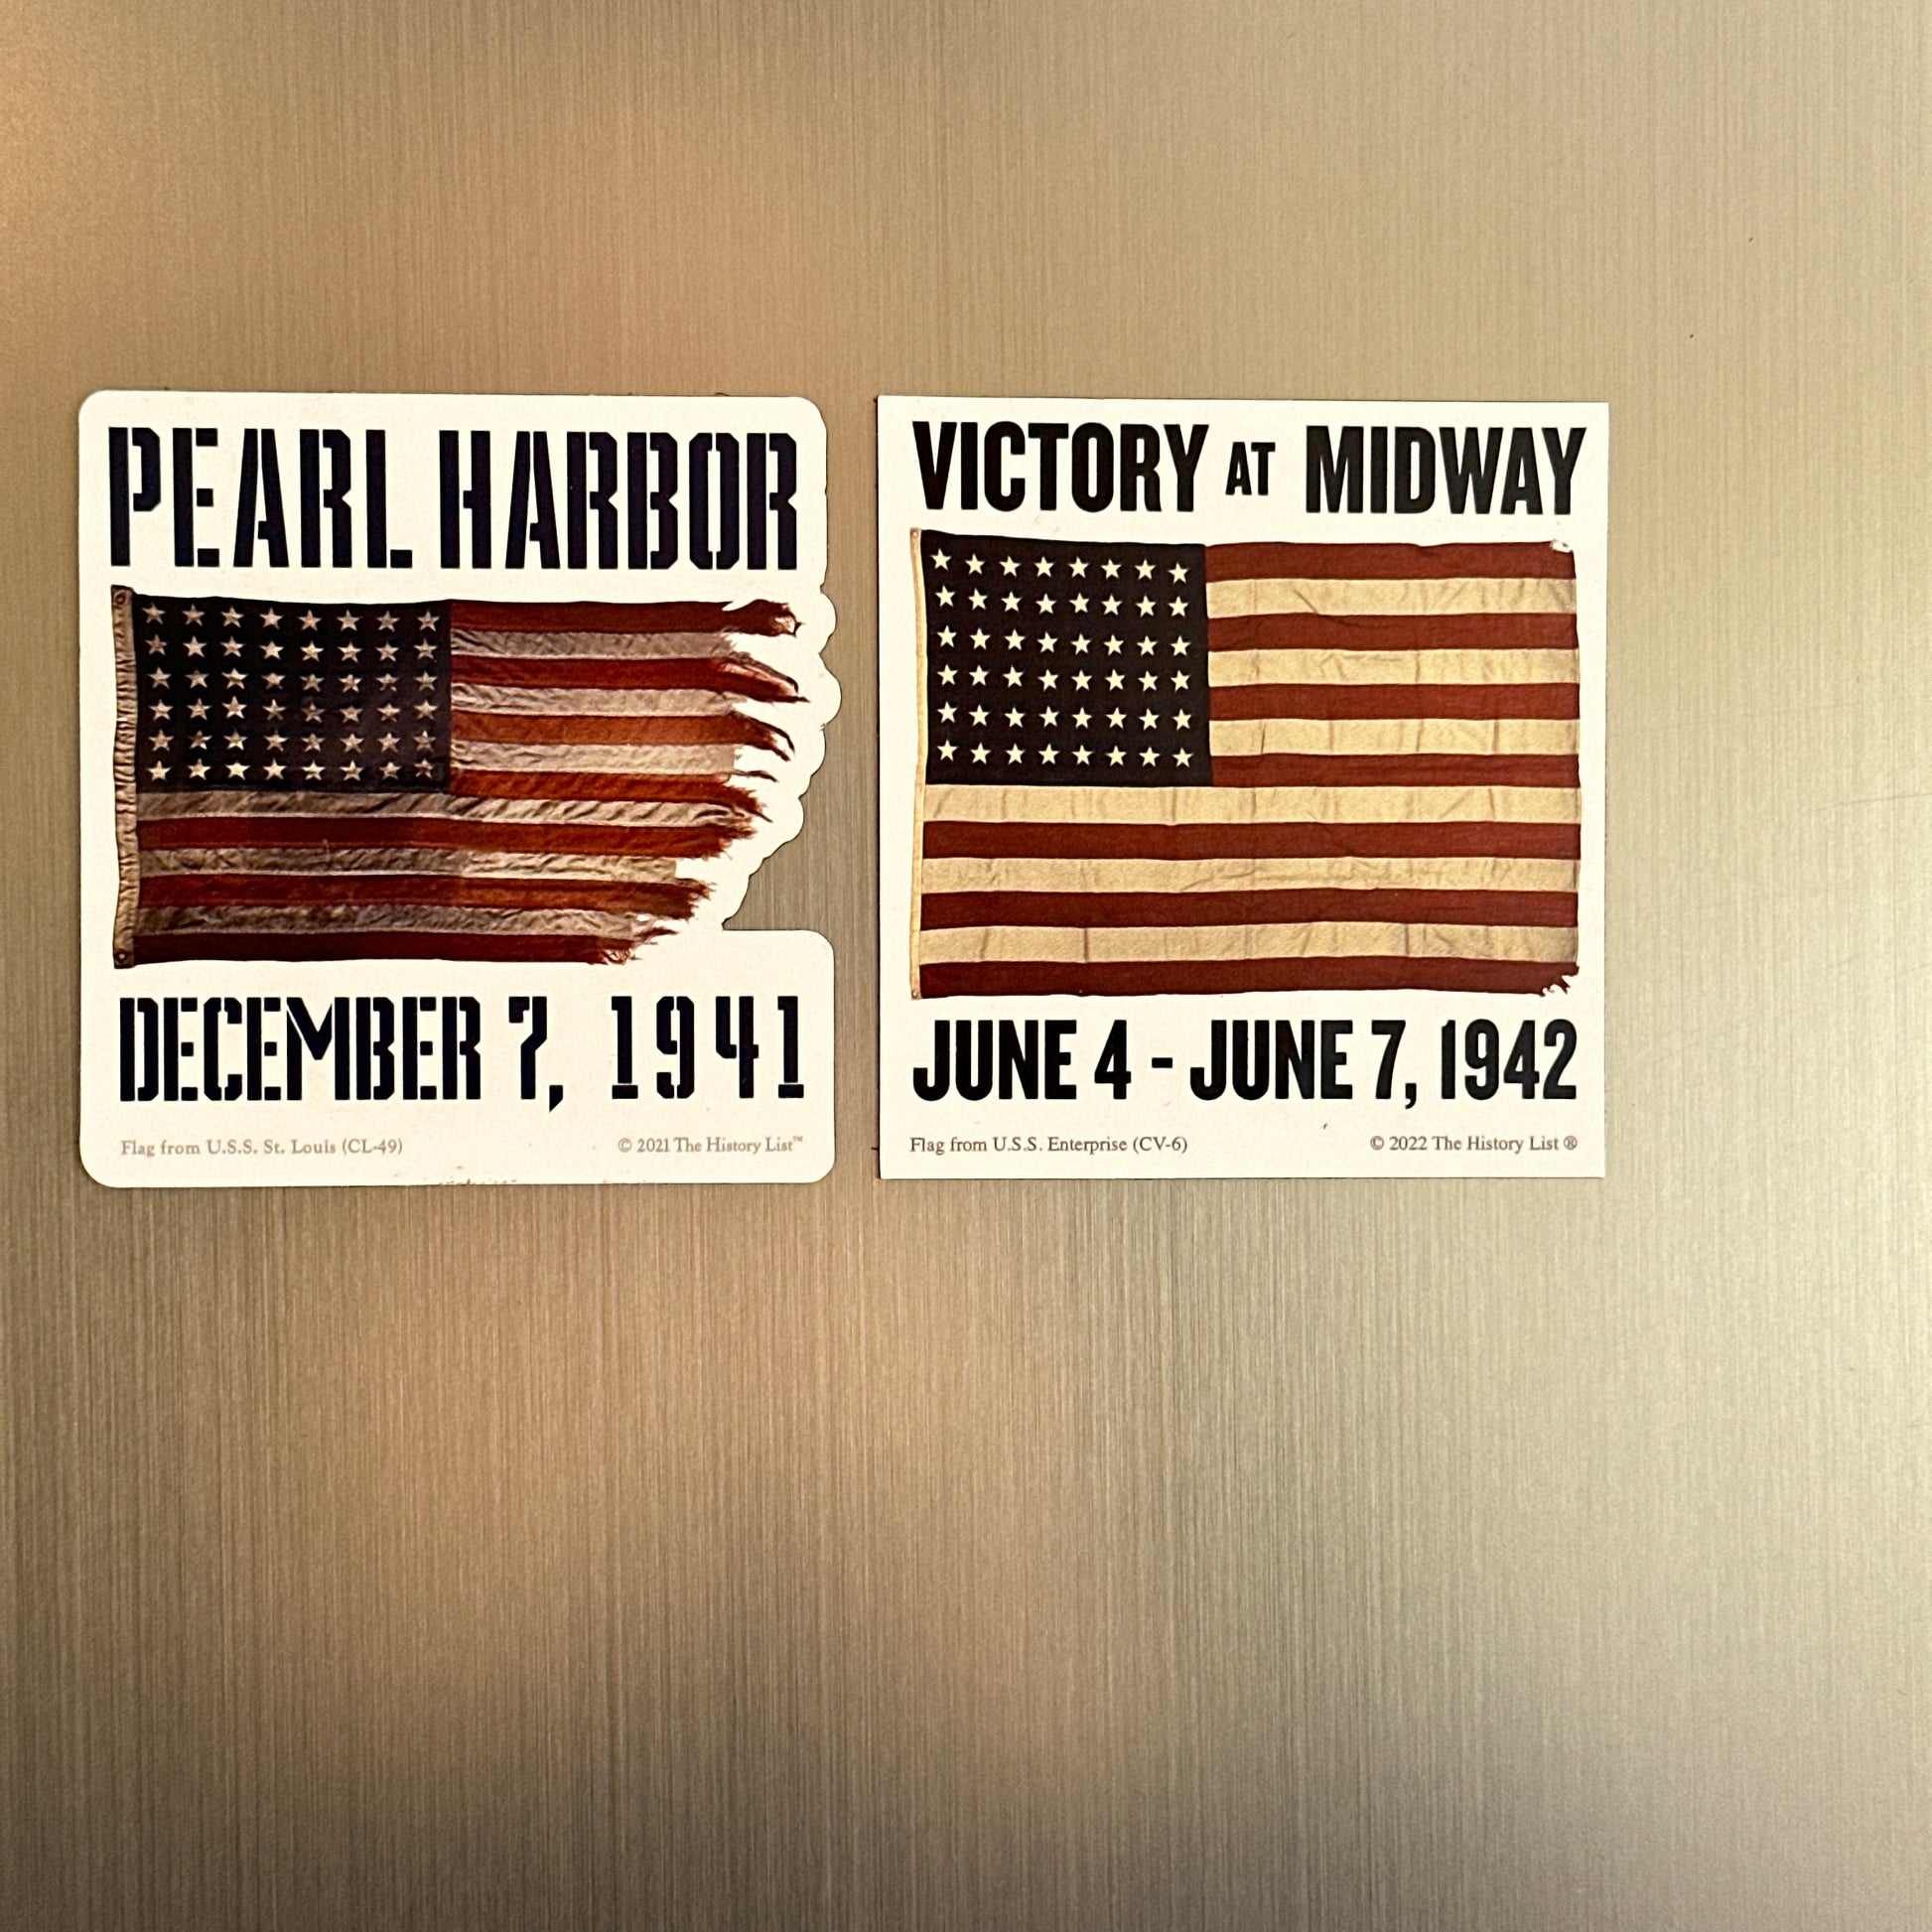 Pearl Harbor "Battleship Row" magnet and "Victory at Midway" magnet from The History List store